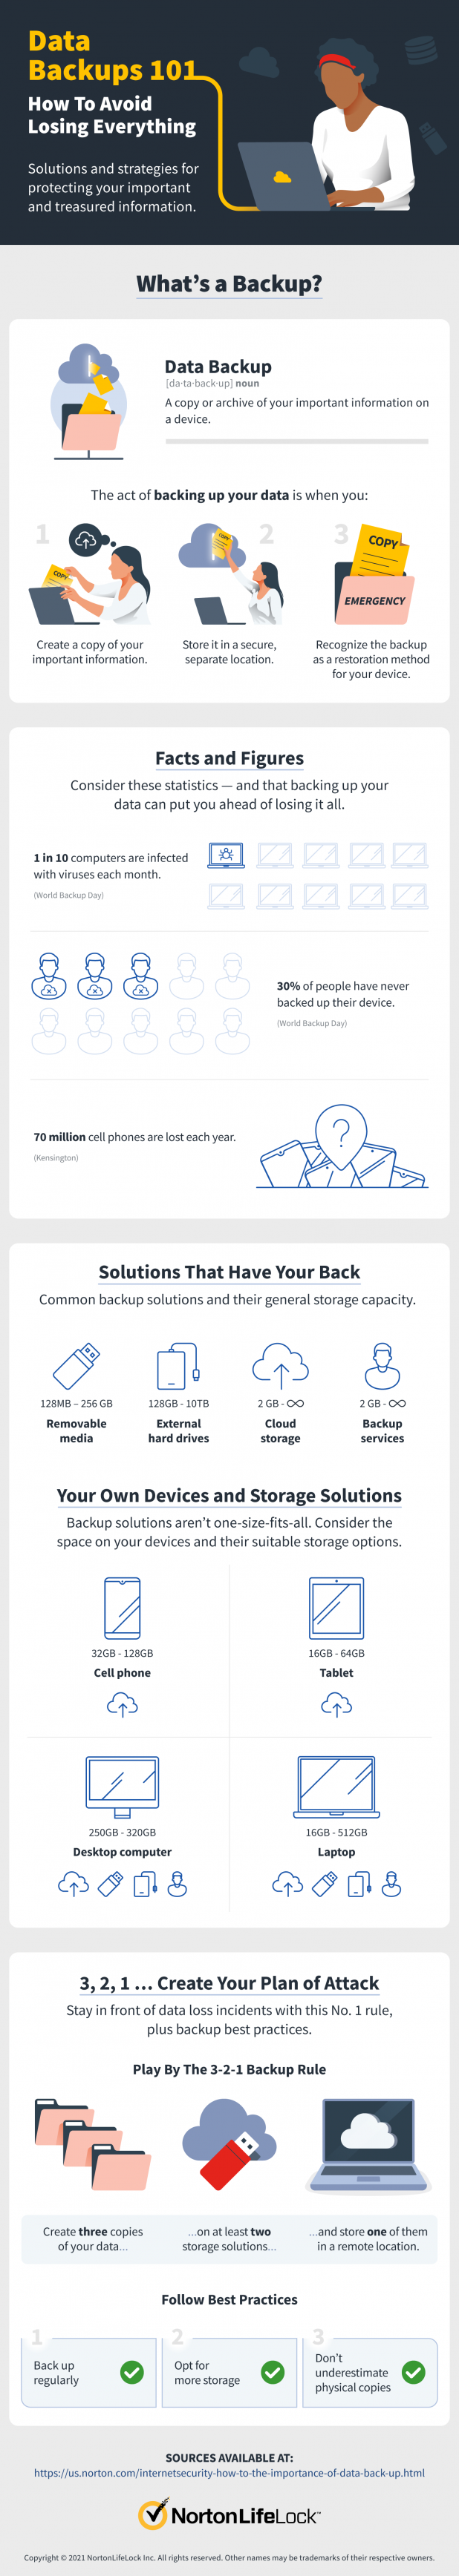 An infographic summing up data backup solutions and storage options, plus data loss statistics